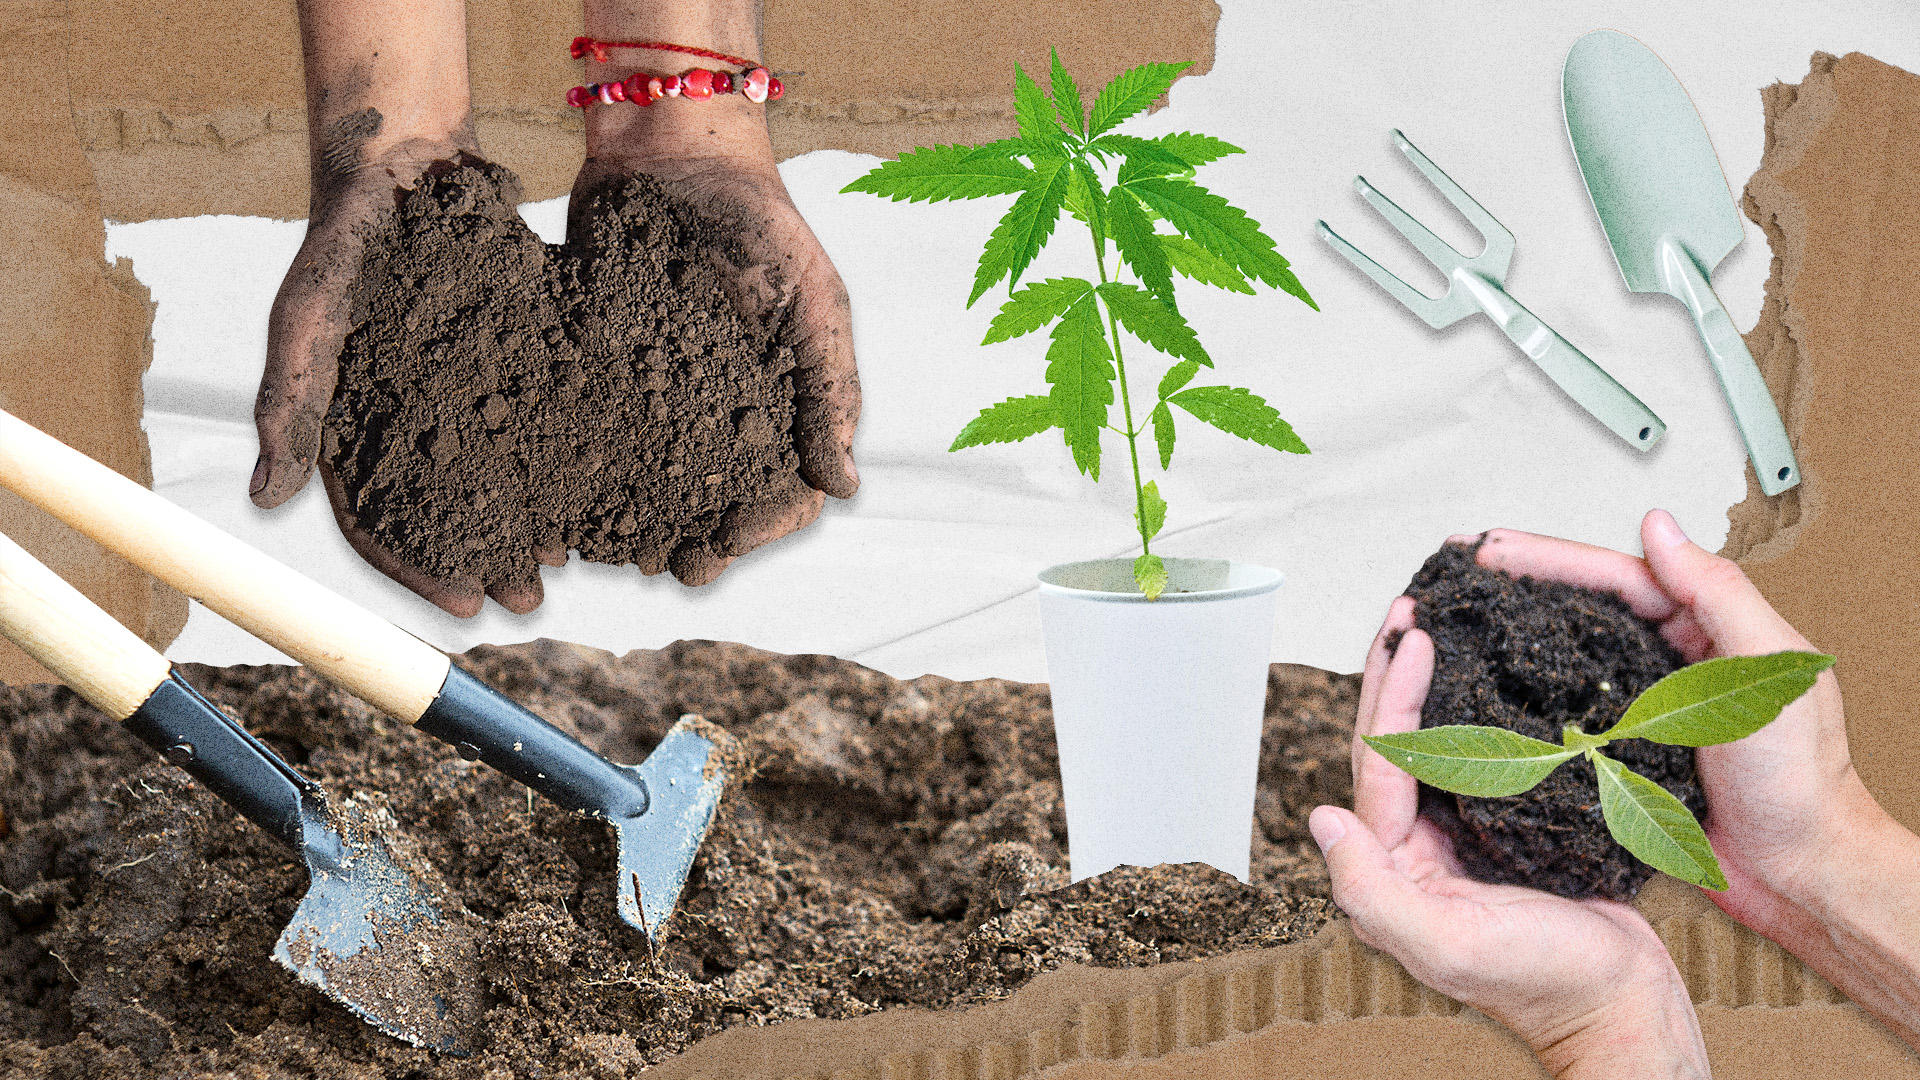 What Is The Best Soil for Growing Cannabis?